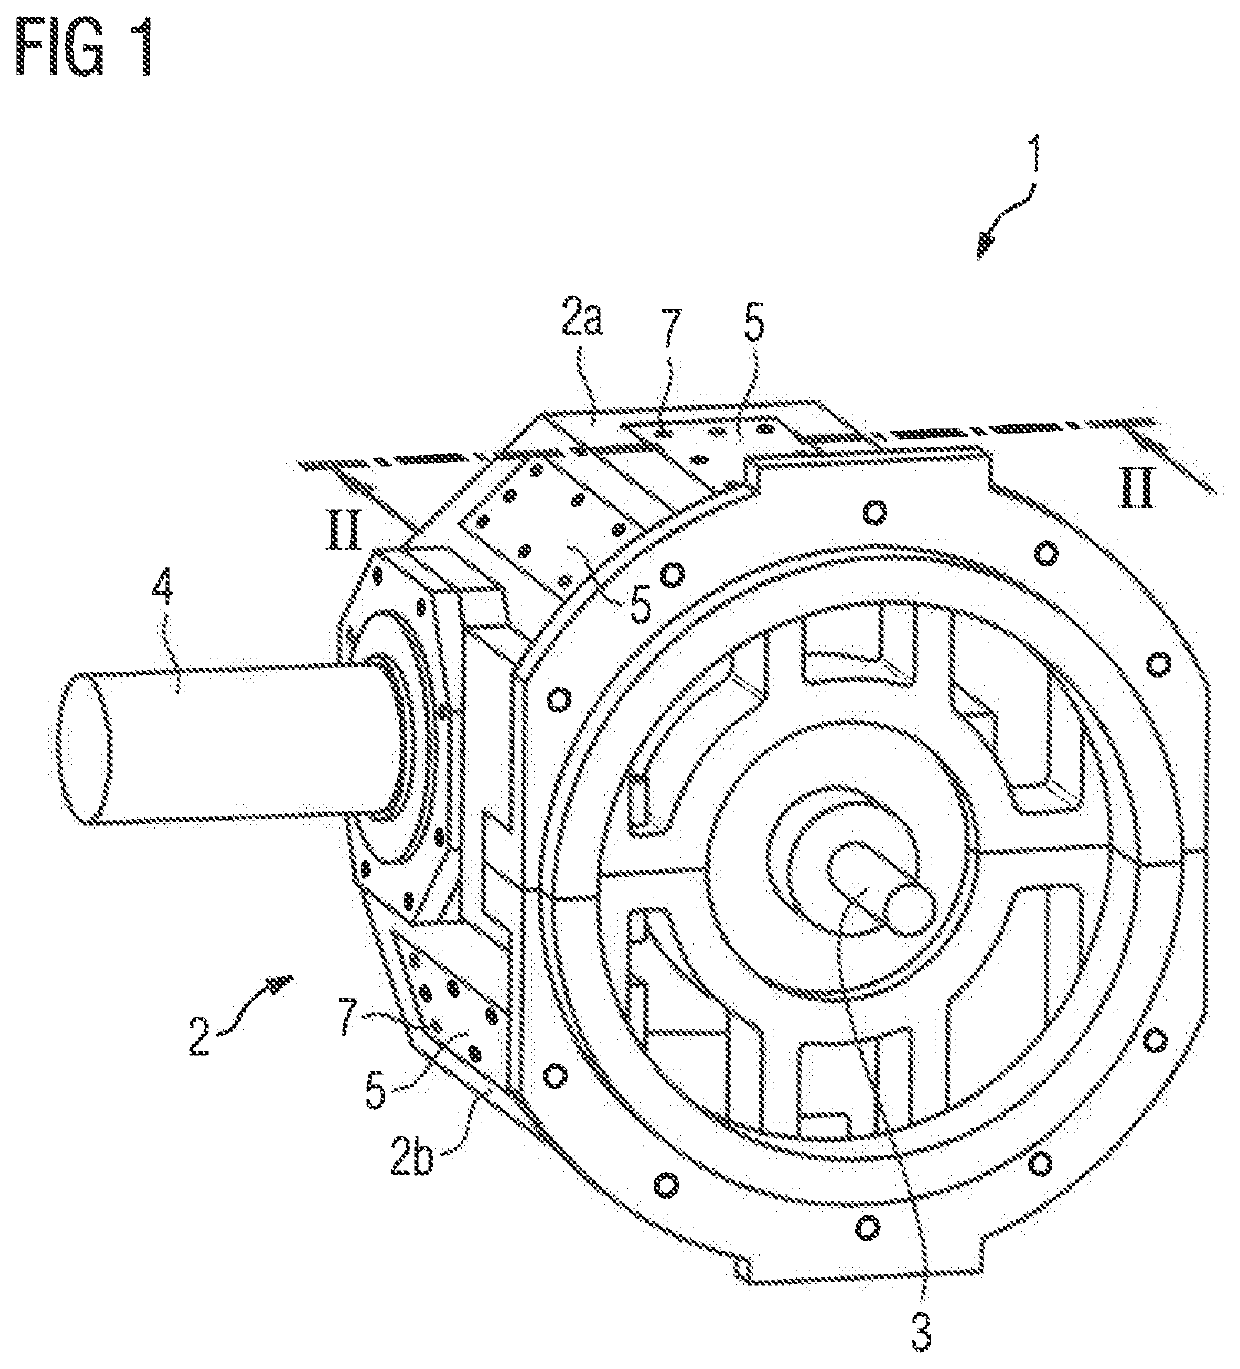 Transmission and method for producing such a transmission